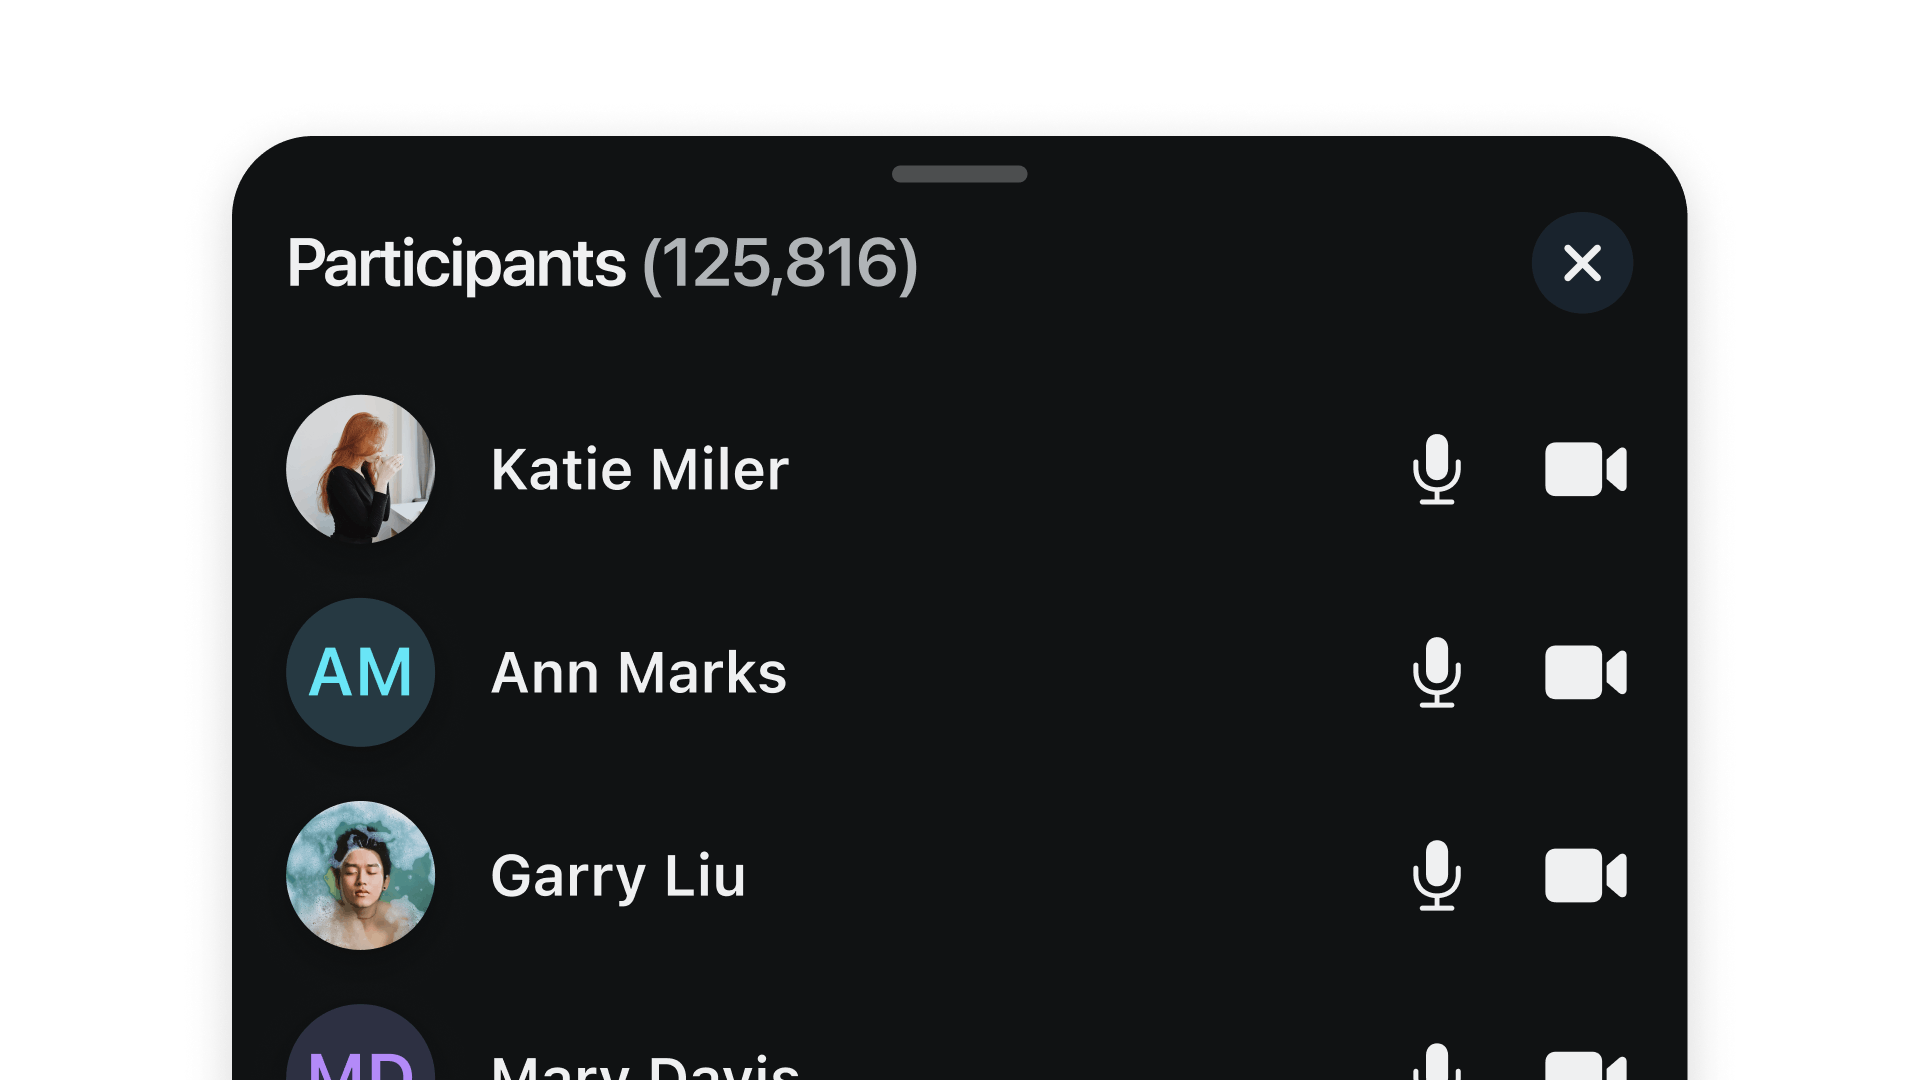 example of a large call with other 100k participants